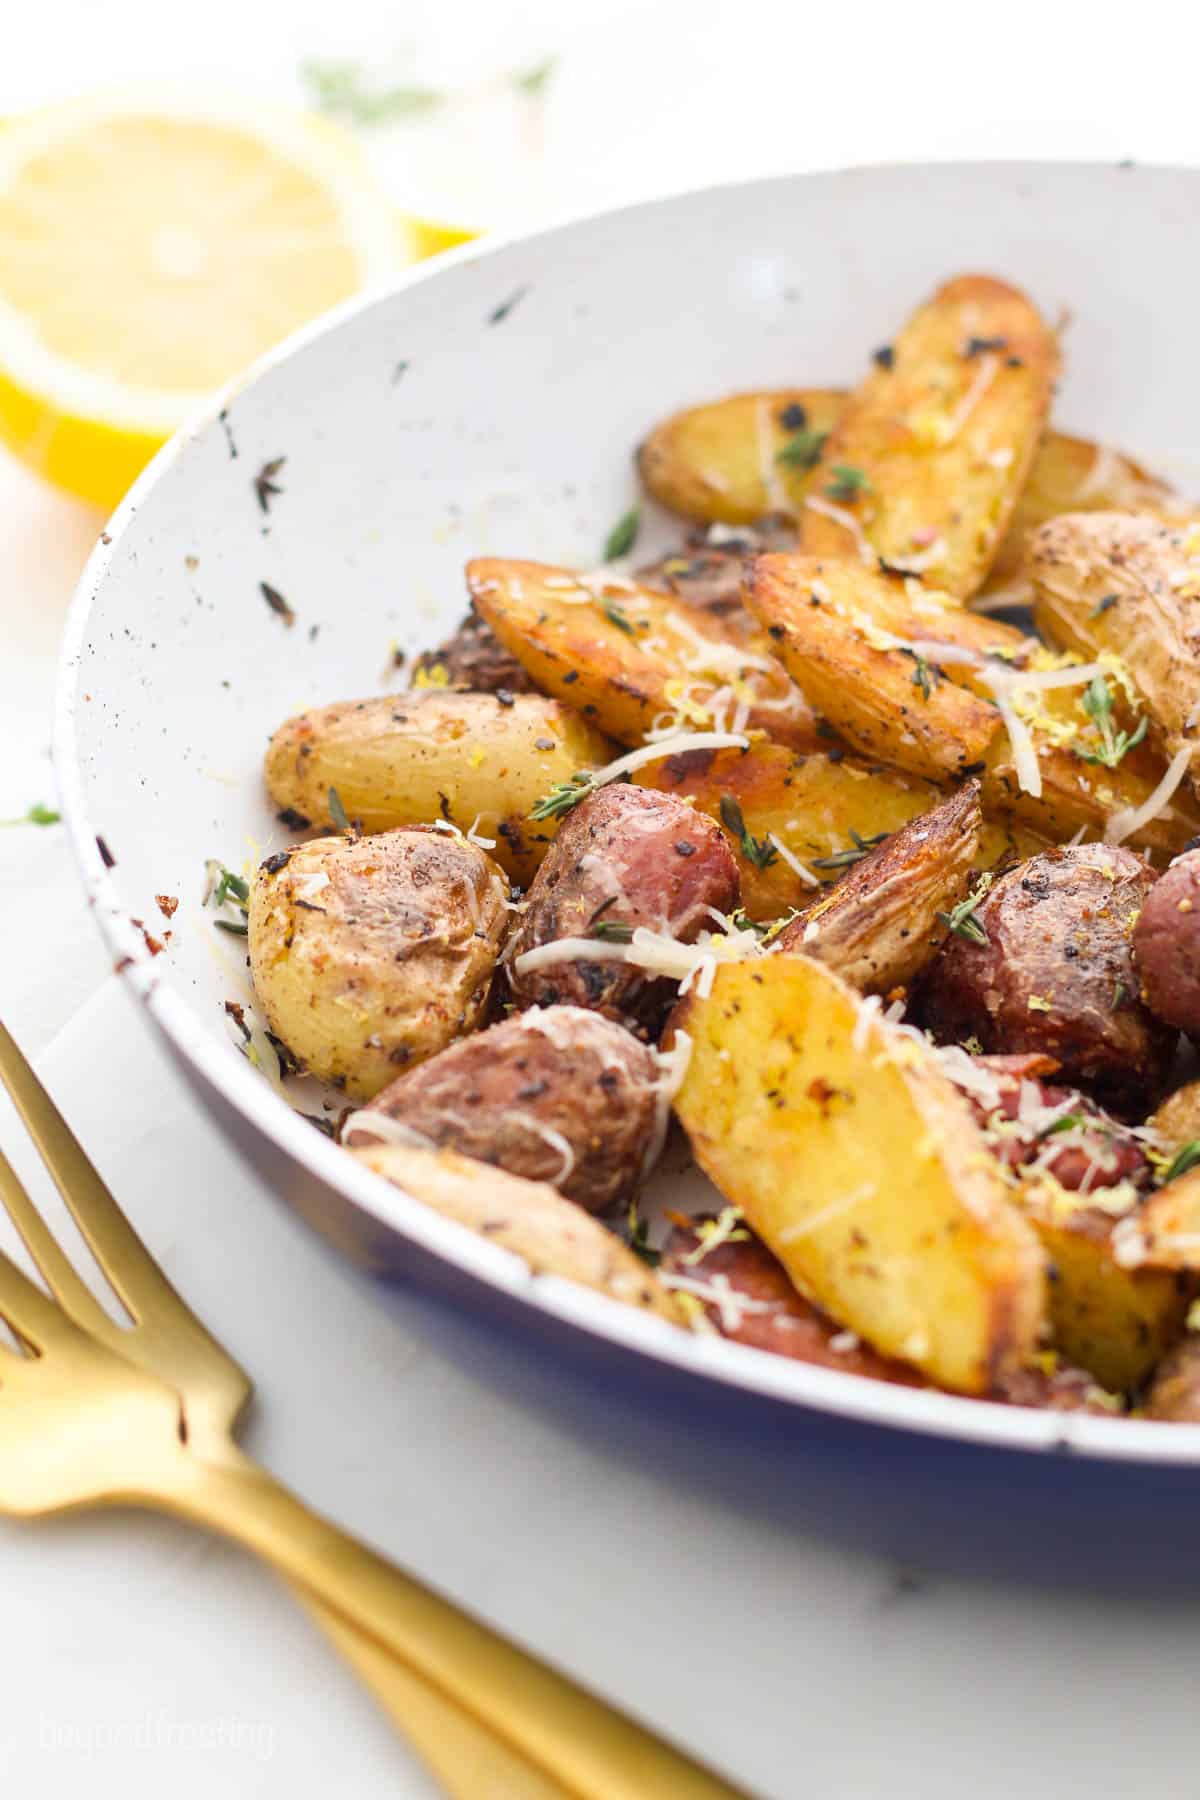 shot of a pile of roasted potatoes in a bowl next to a gold fork